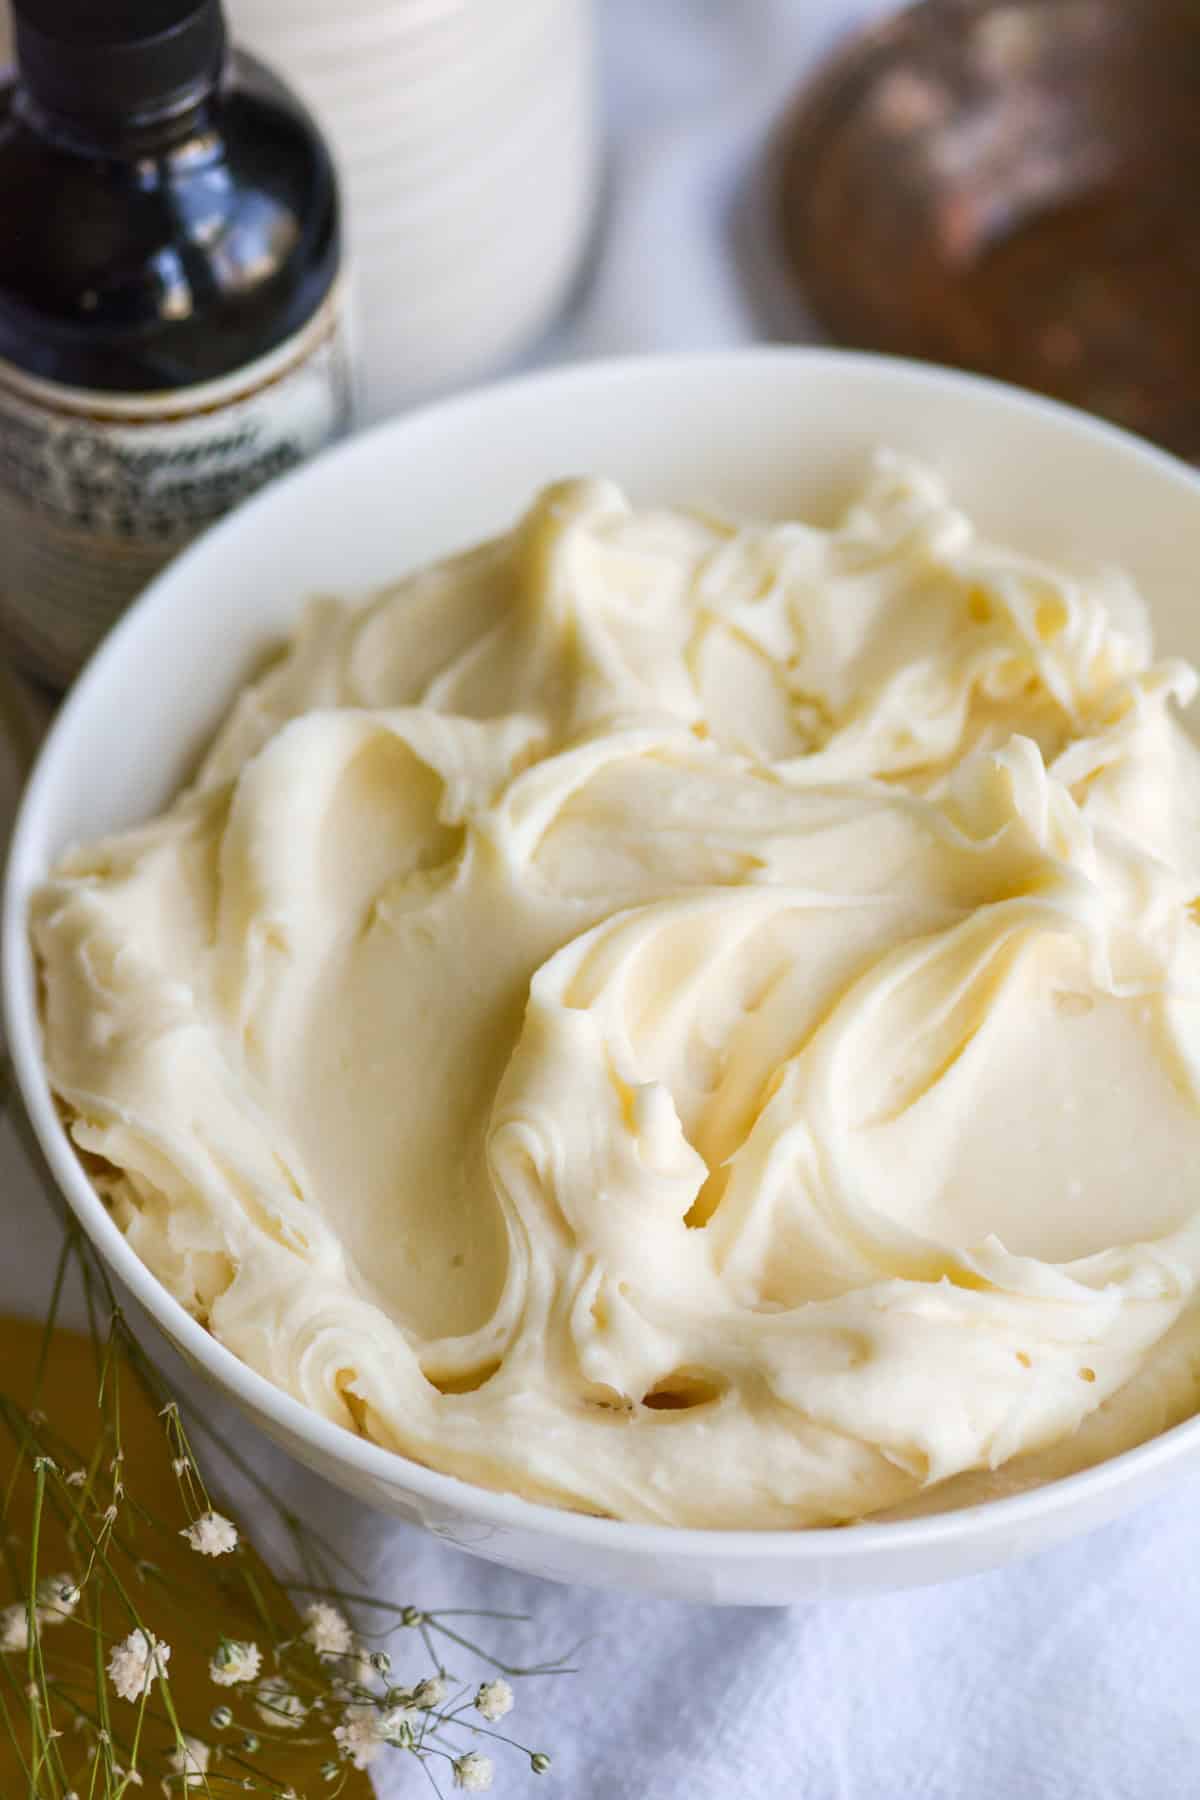 Vegan Cream Cheese Frosting in a bowl on a white cloth.